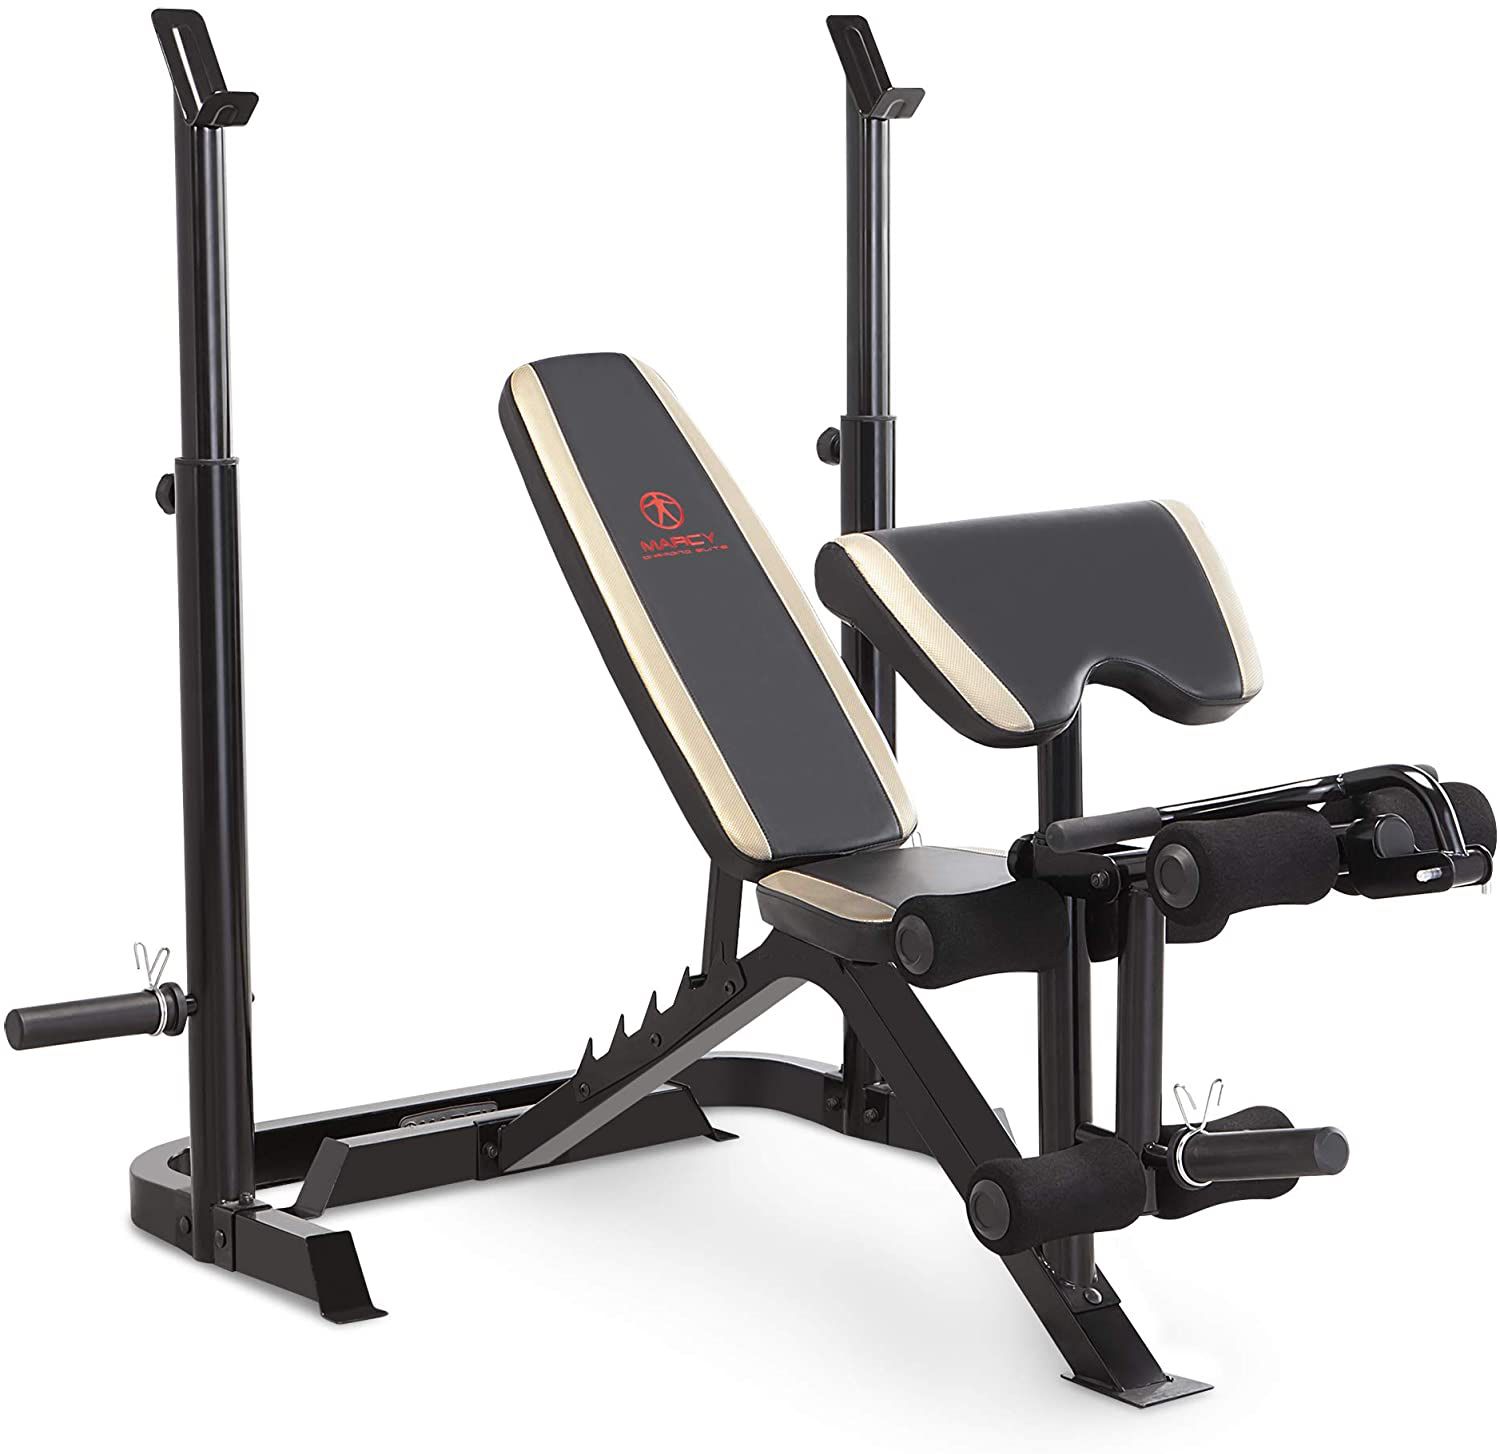 Marcy Adjustable Olympic Weight Bench with Leg Developer and Squat Rack MD-879